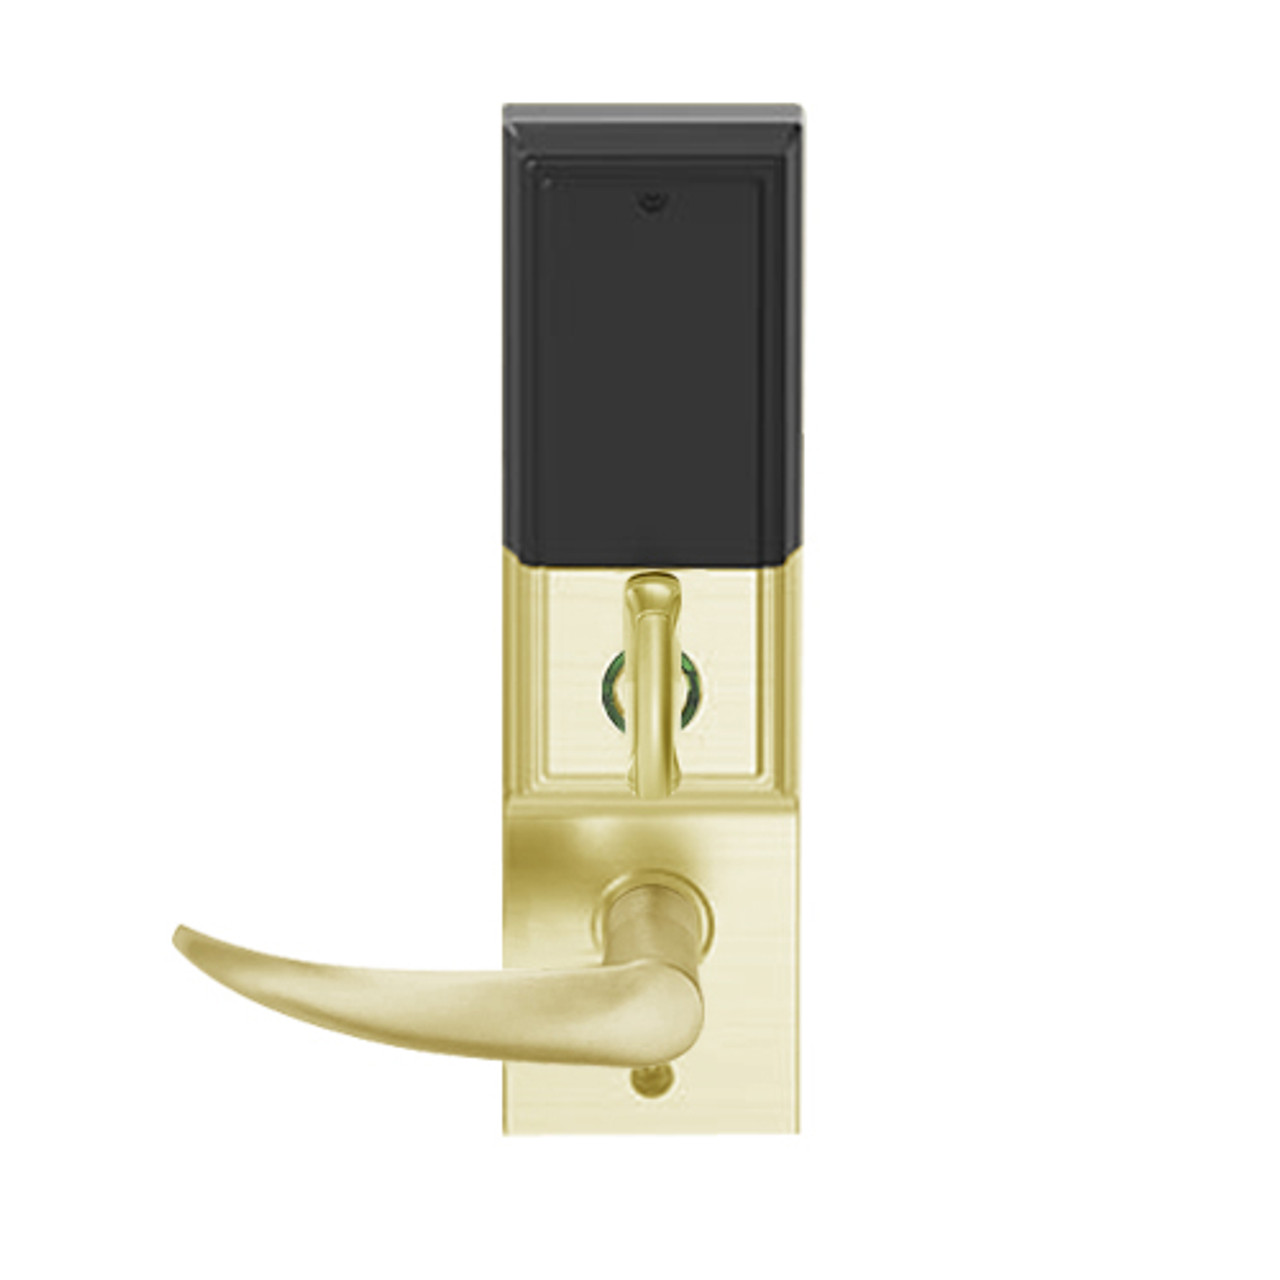 LEMD-ADD-J-OME-606 Schlage Privacy/Apartment Wireless Addison Mortise Deadbolt Lock with LED and Omega Lever Prepped for FSIC in Satin Brass